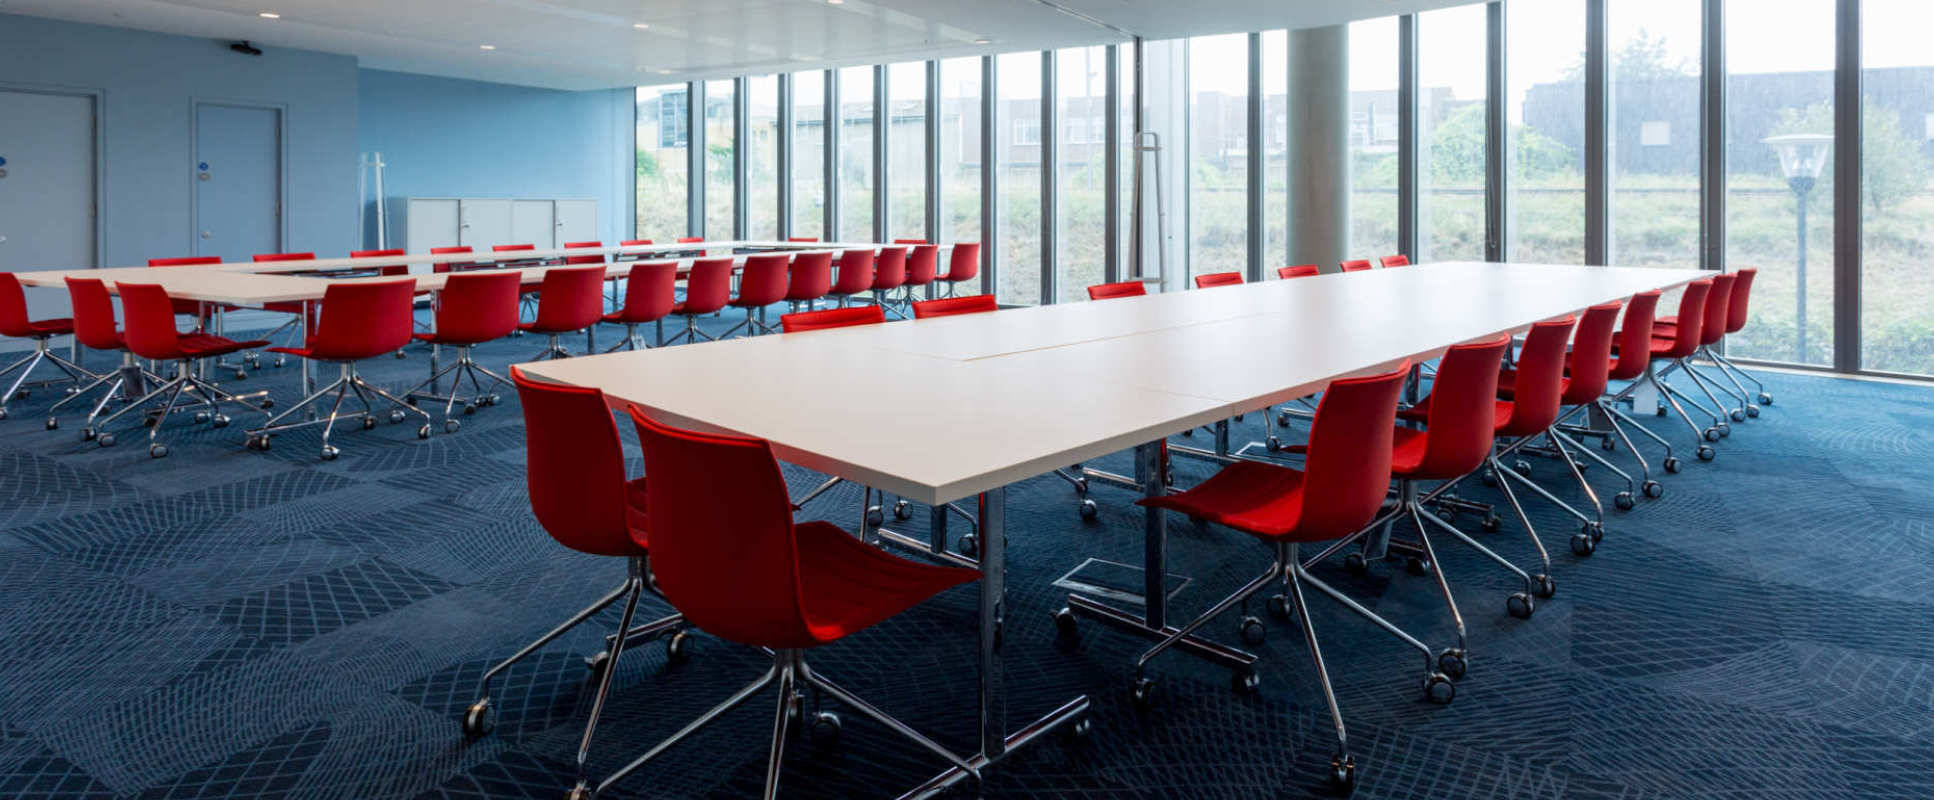 I-HUB conference rooms